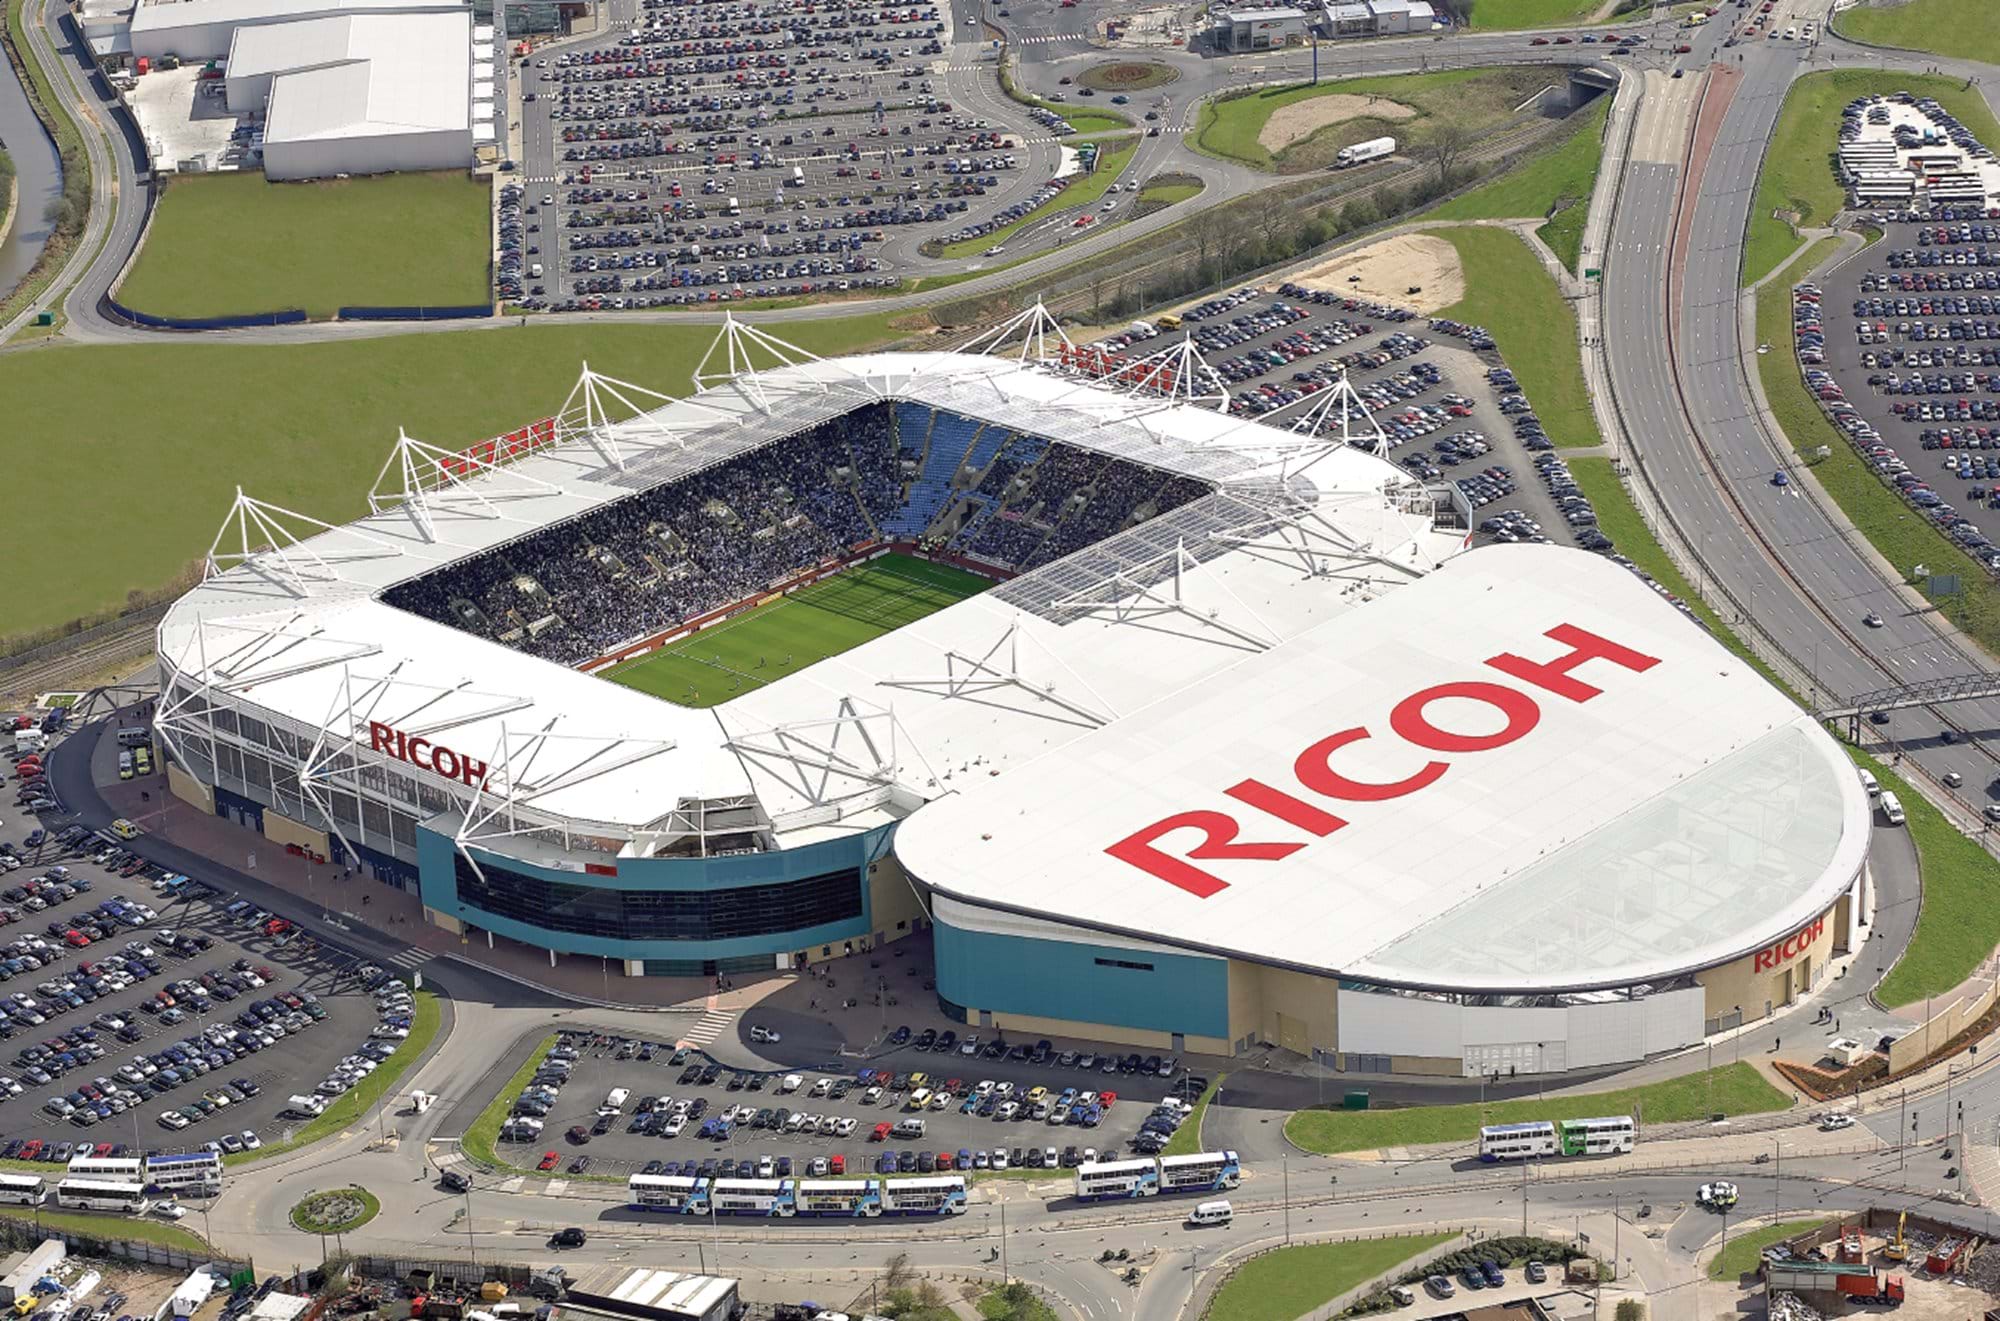 Ricoh Arena to host three further TV events & Winter